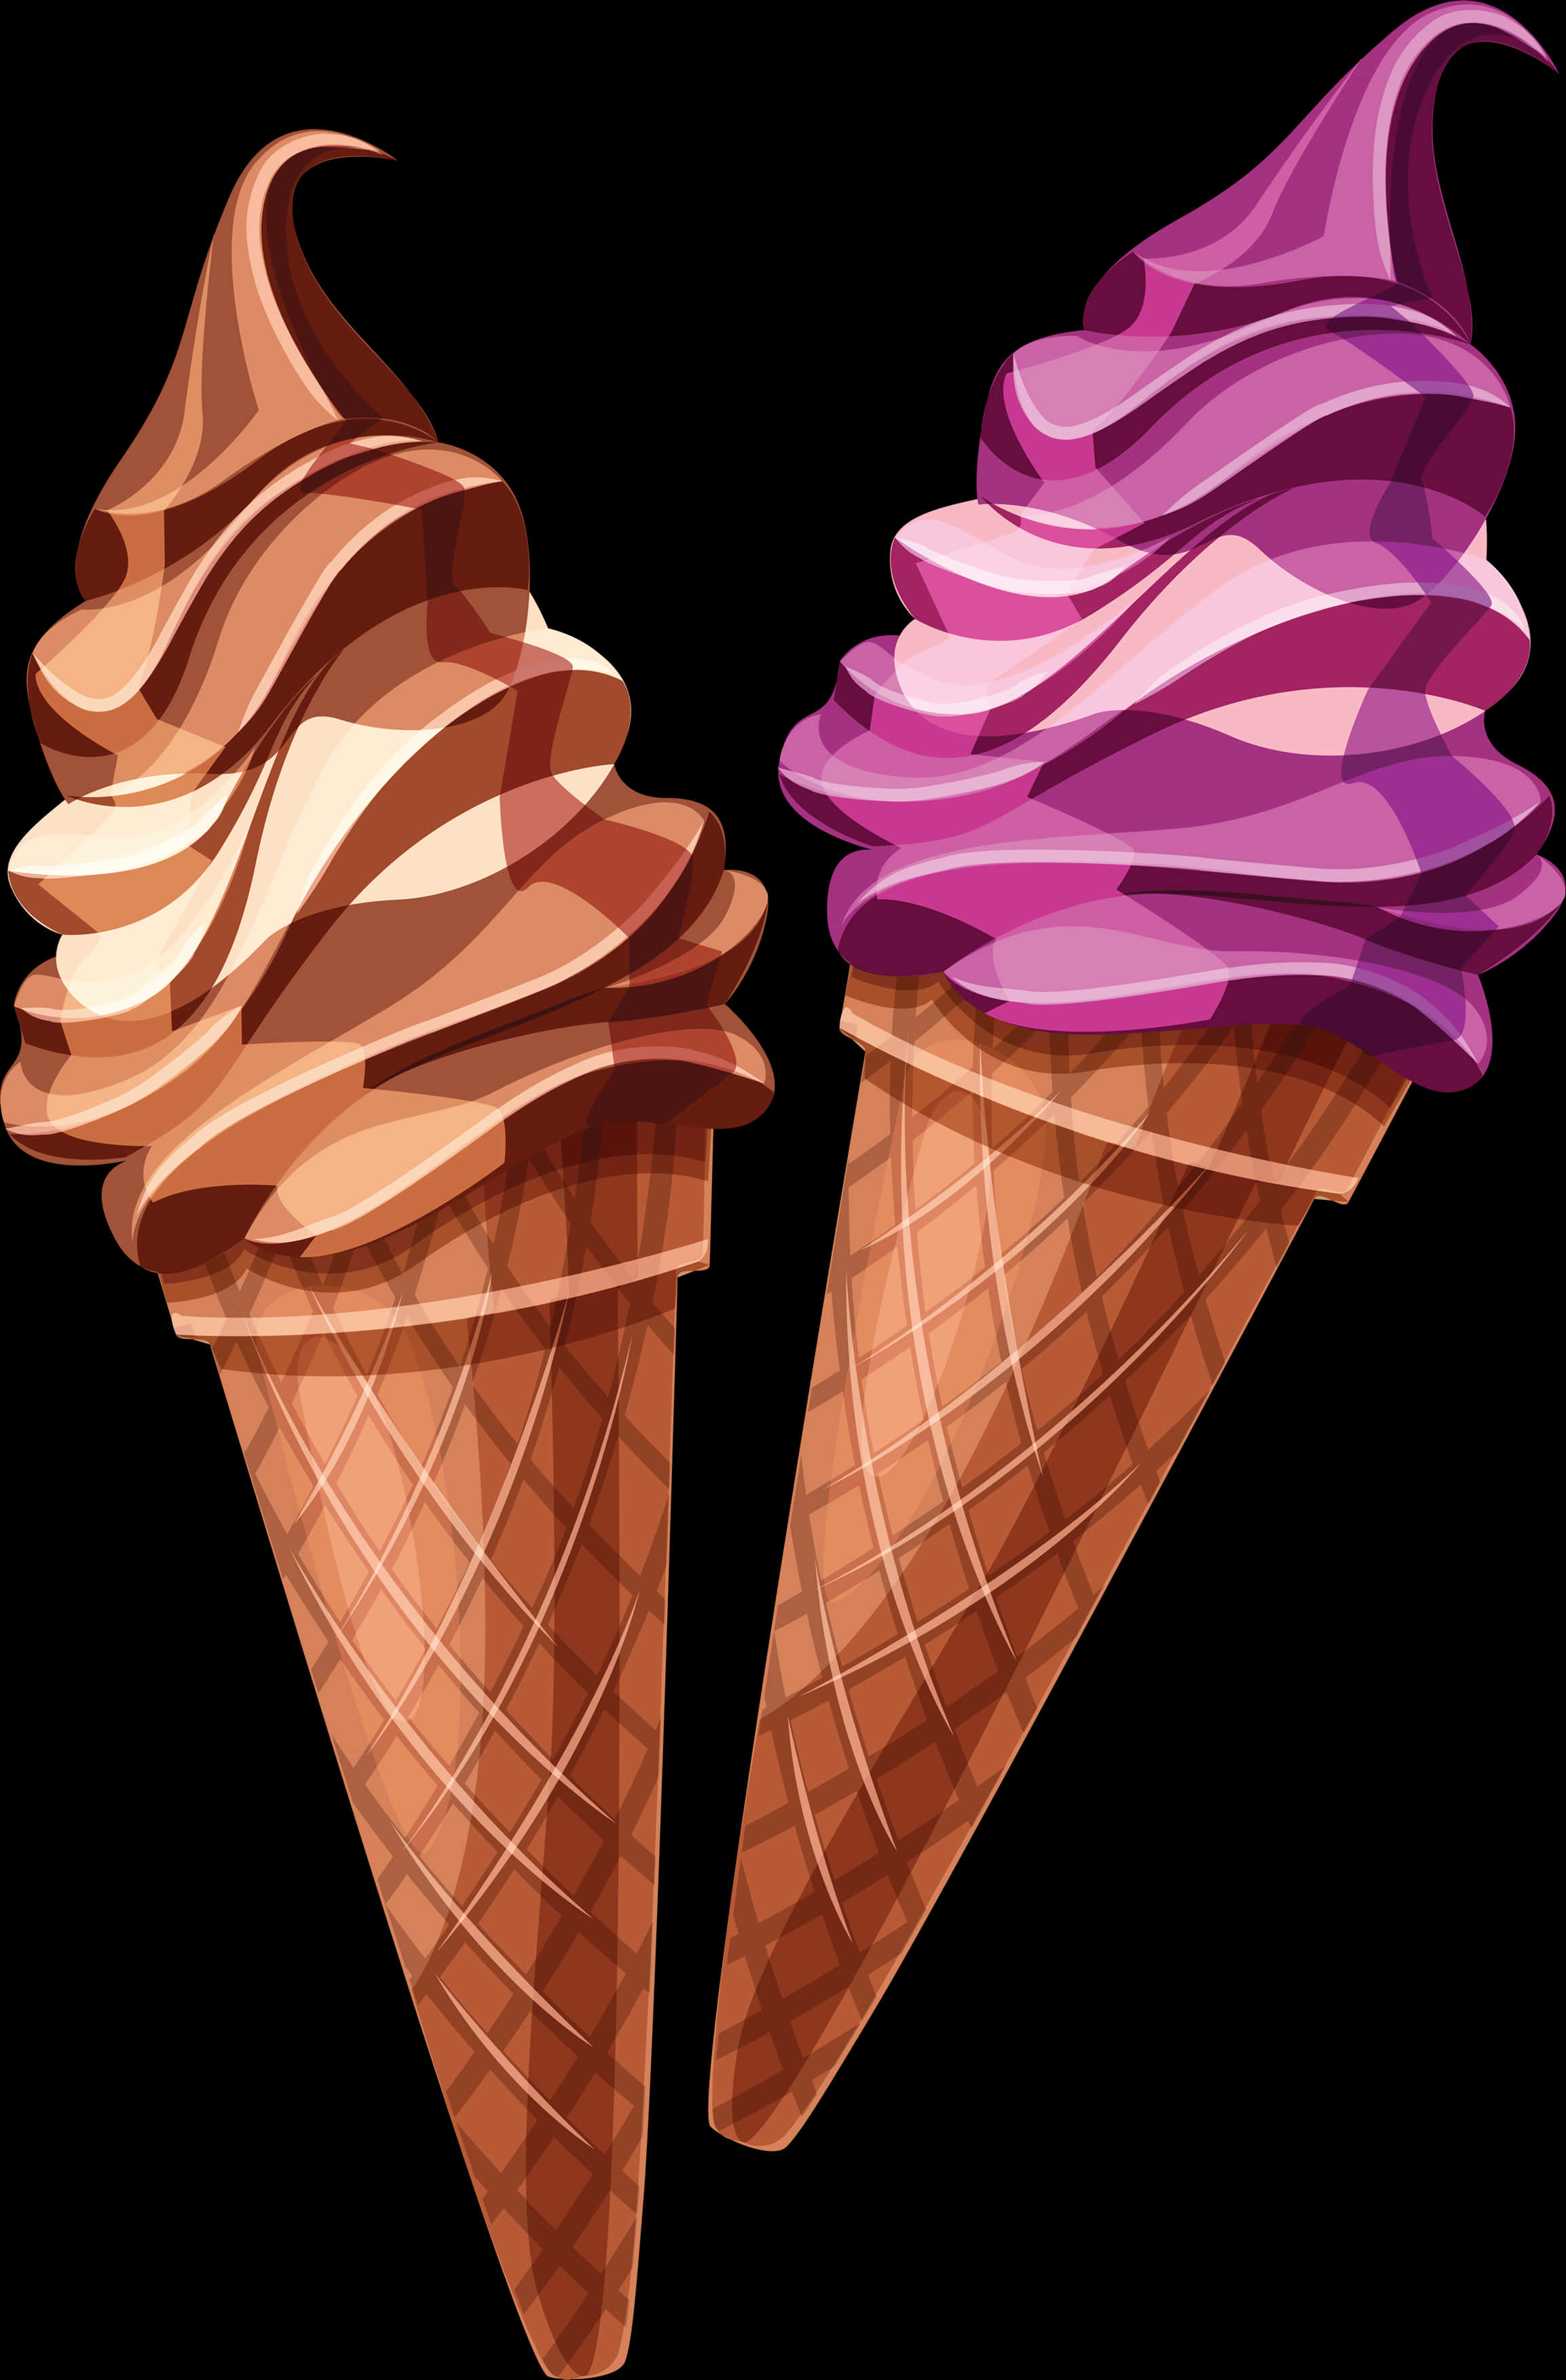 Two Ice Cream Cones With Purple And Pink Toppings